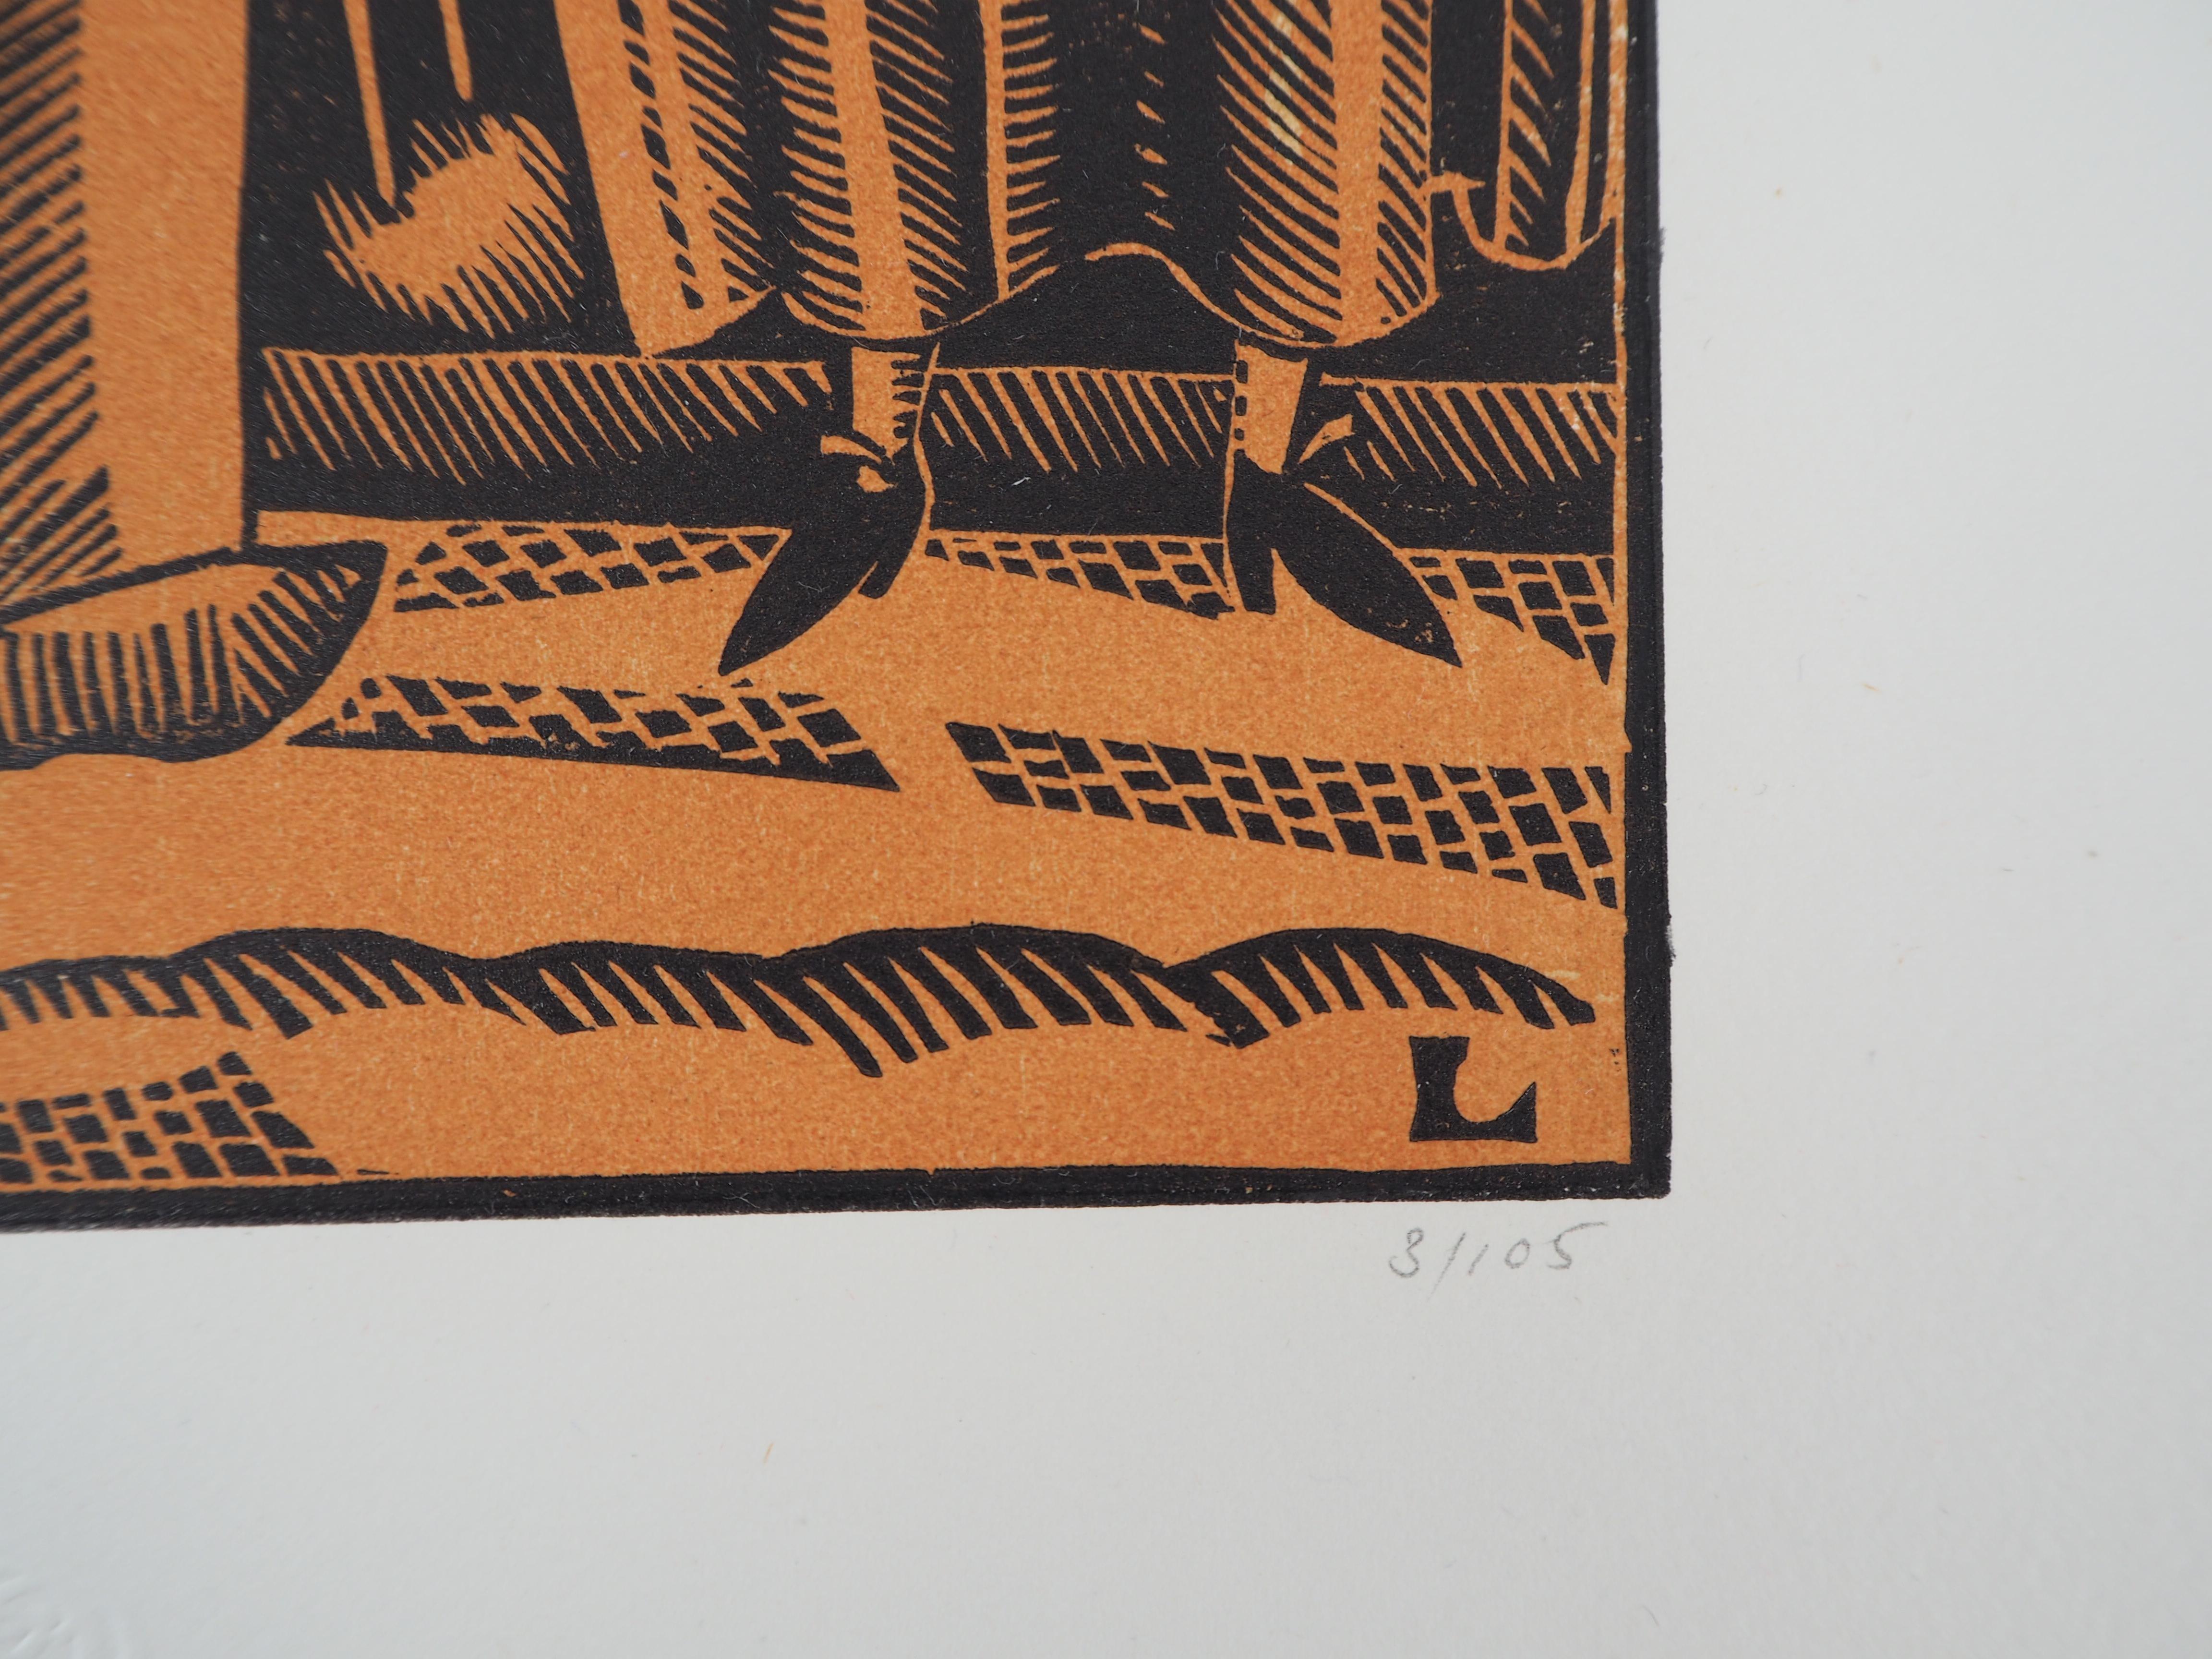 Cafe des Allies - Original woodcut, Handsigned and Numbered /105 - Ref #L725 - Print by Jean-Emile Laboureur